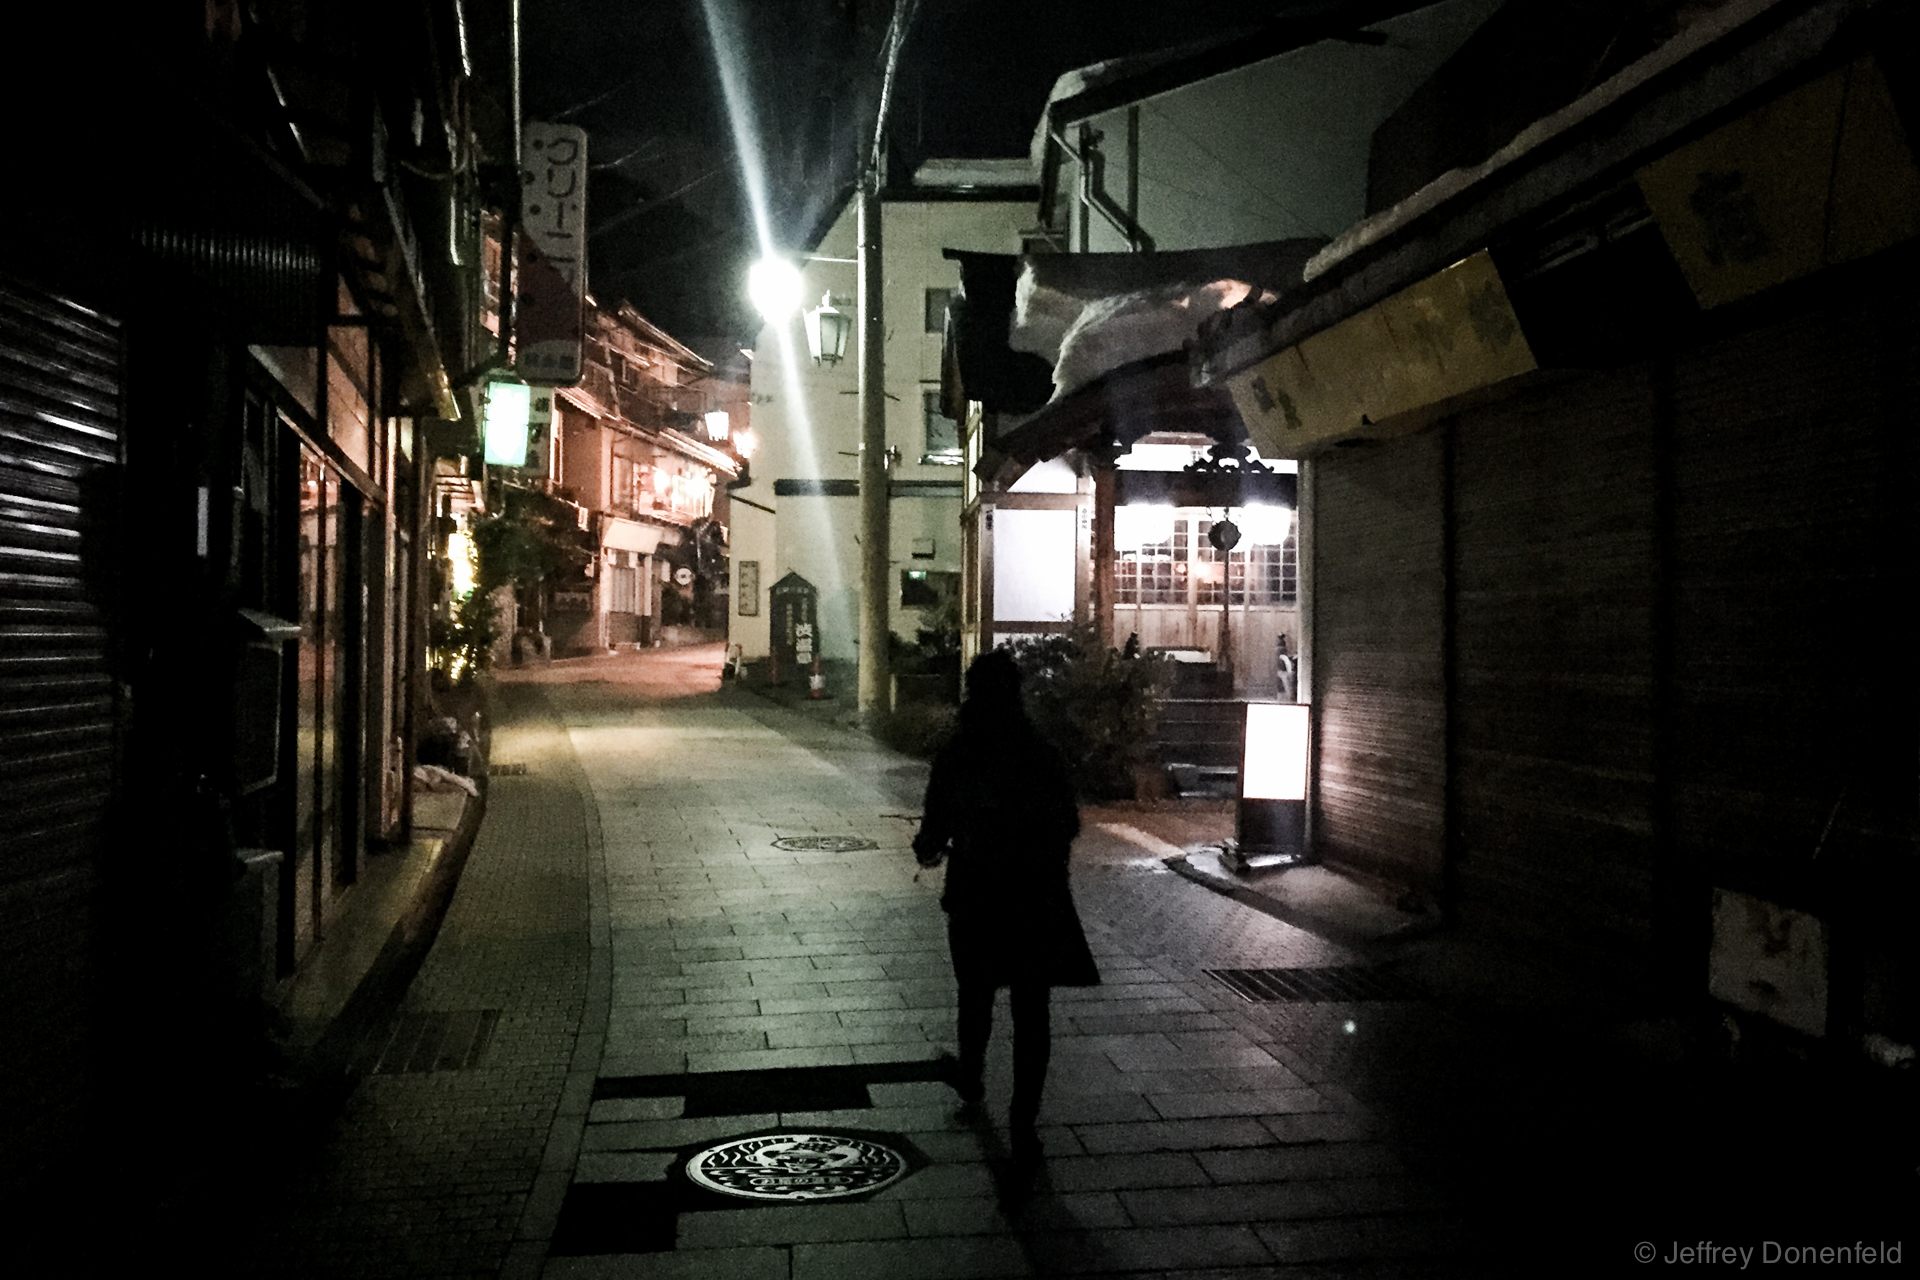 Walking through the streets of Shibu Onsen at night. The traditional town is beautifully old-worldly, with cobblestone streets and traditional houses. Also, streams of geothermally heated onsen water  bubble from pipes and vents everywhere.